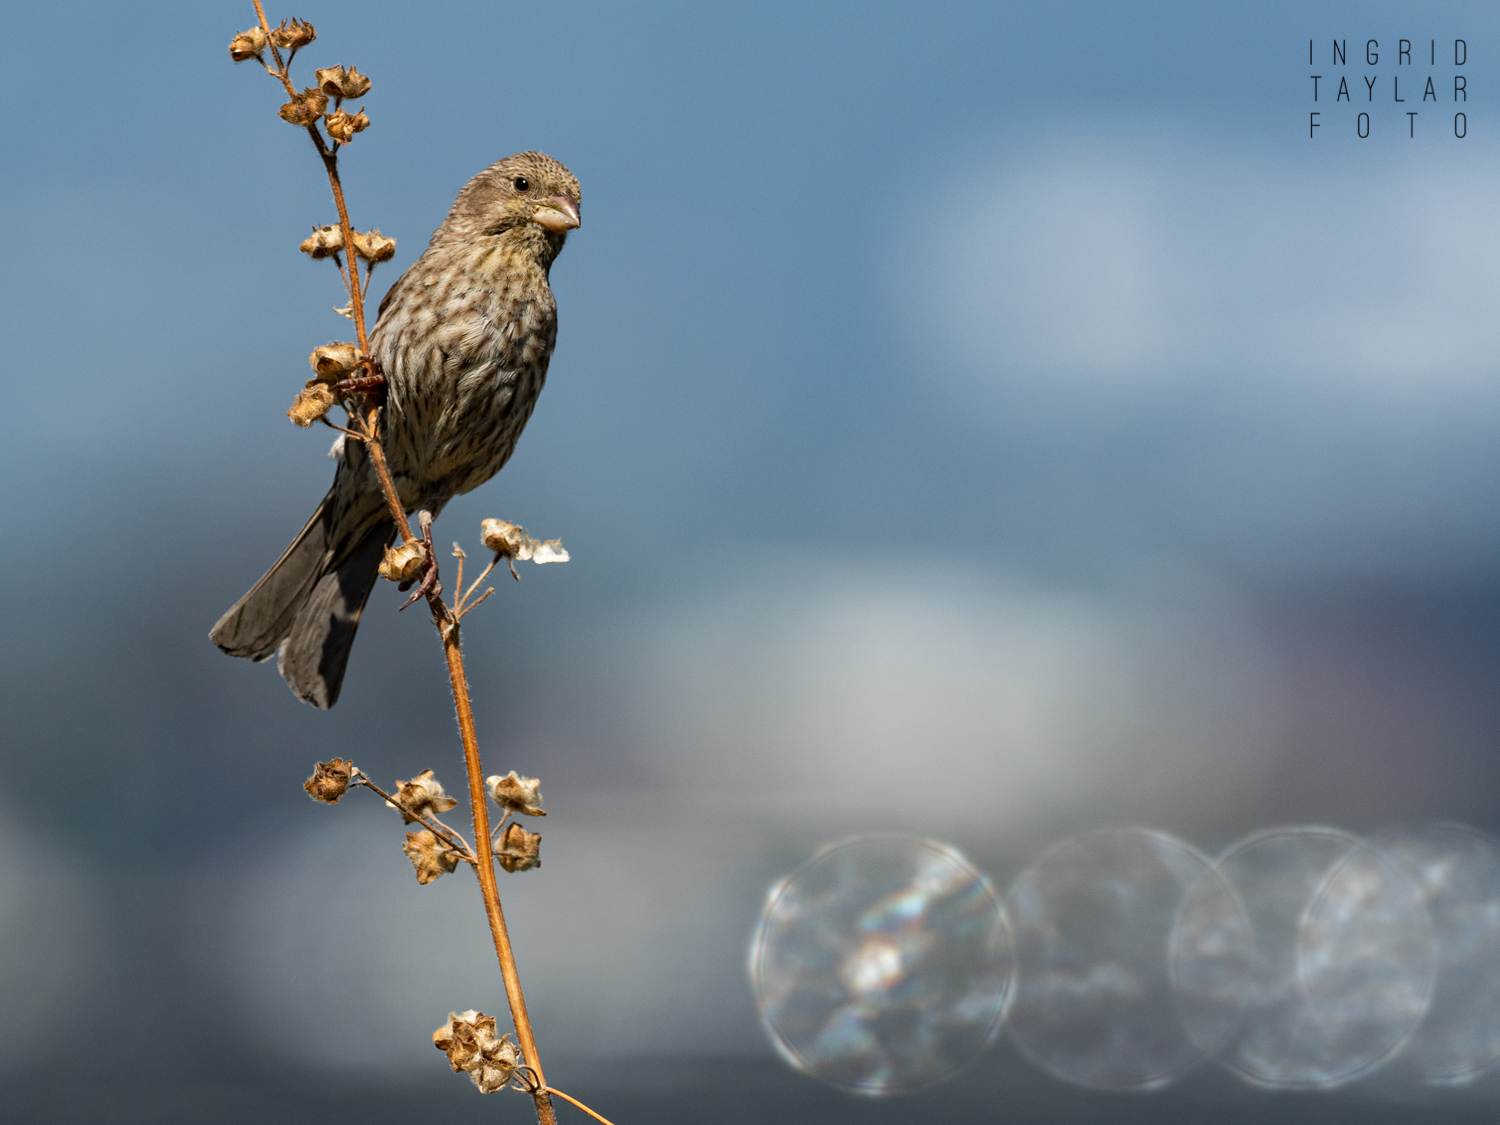 Female House Finch with Light Spheres